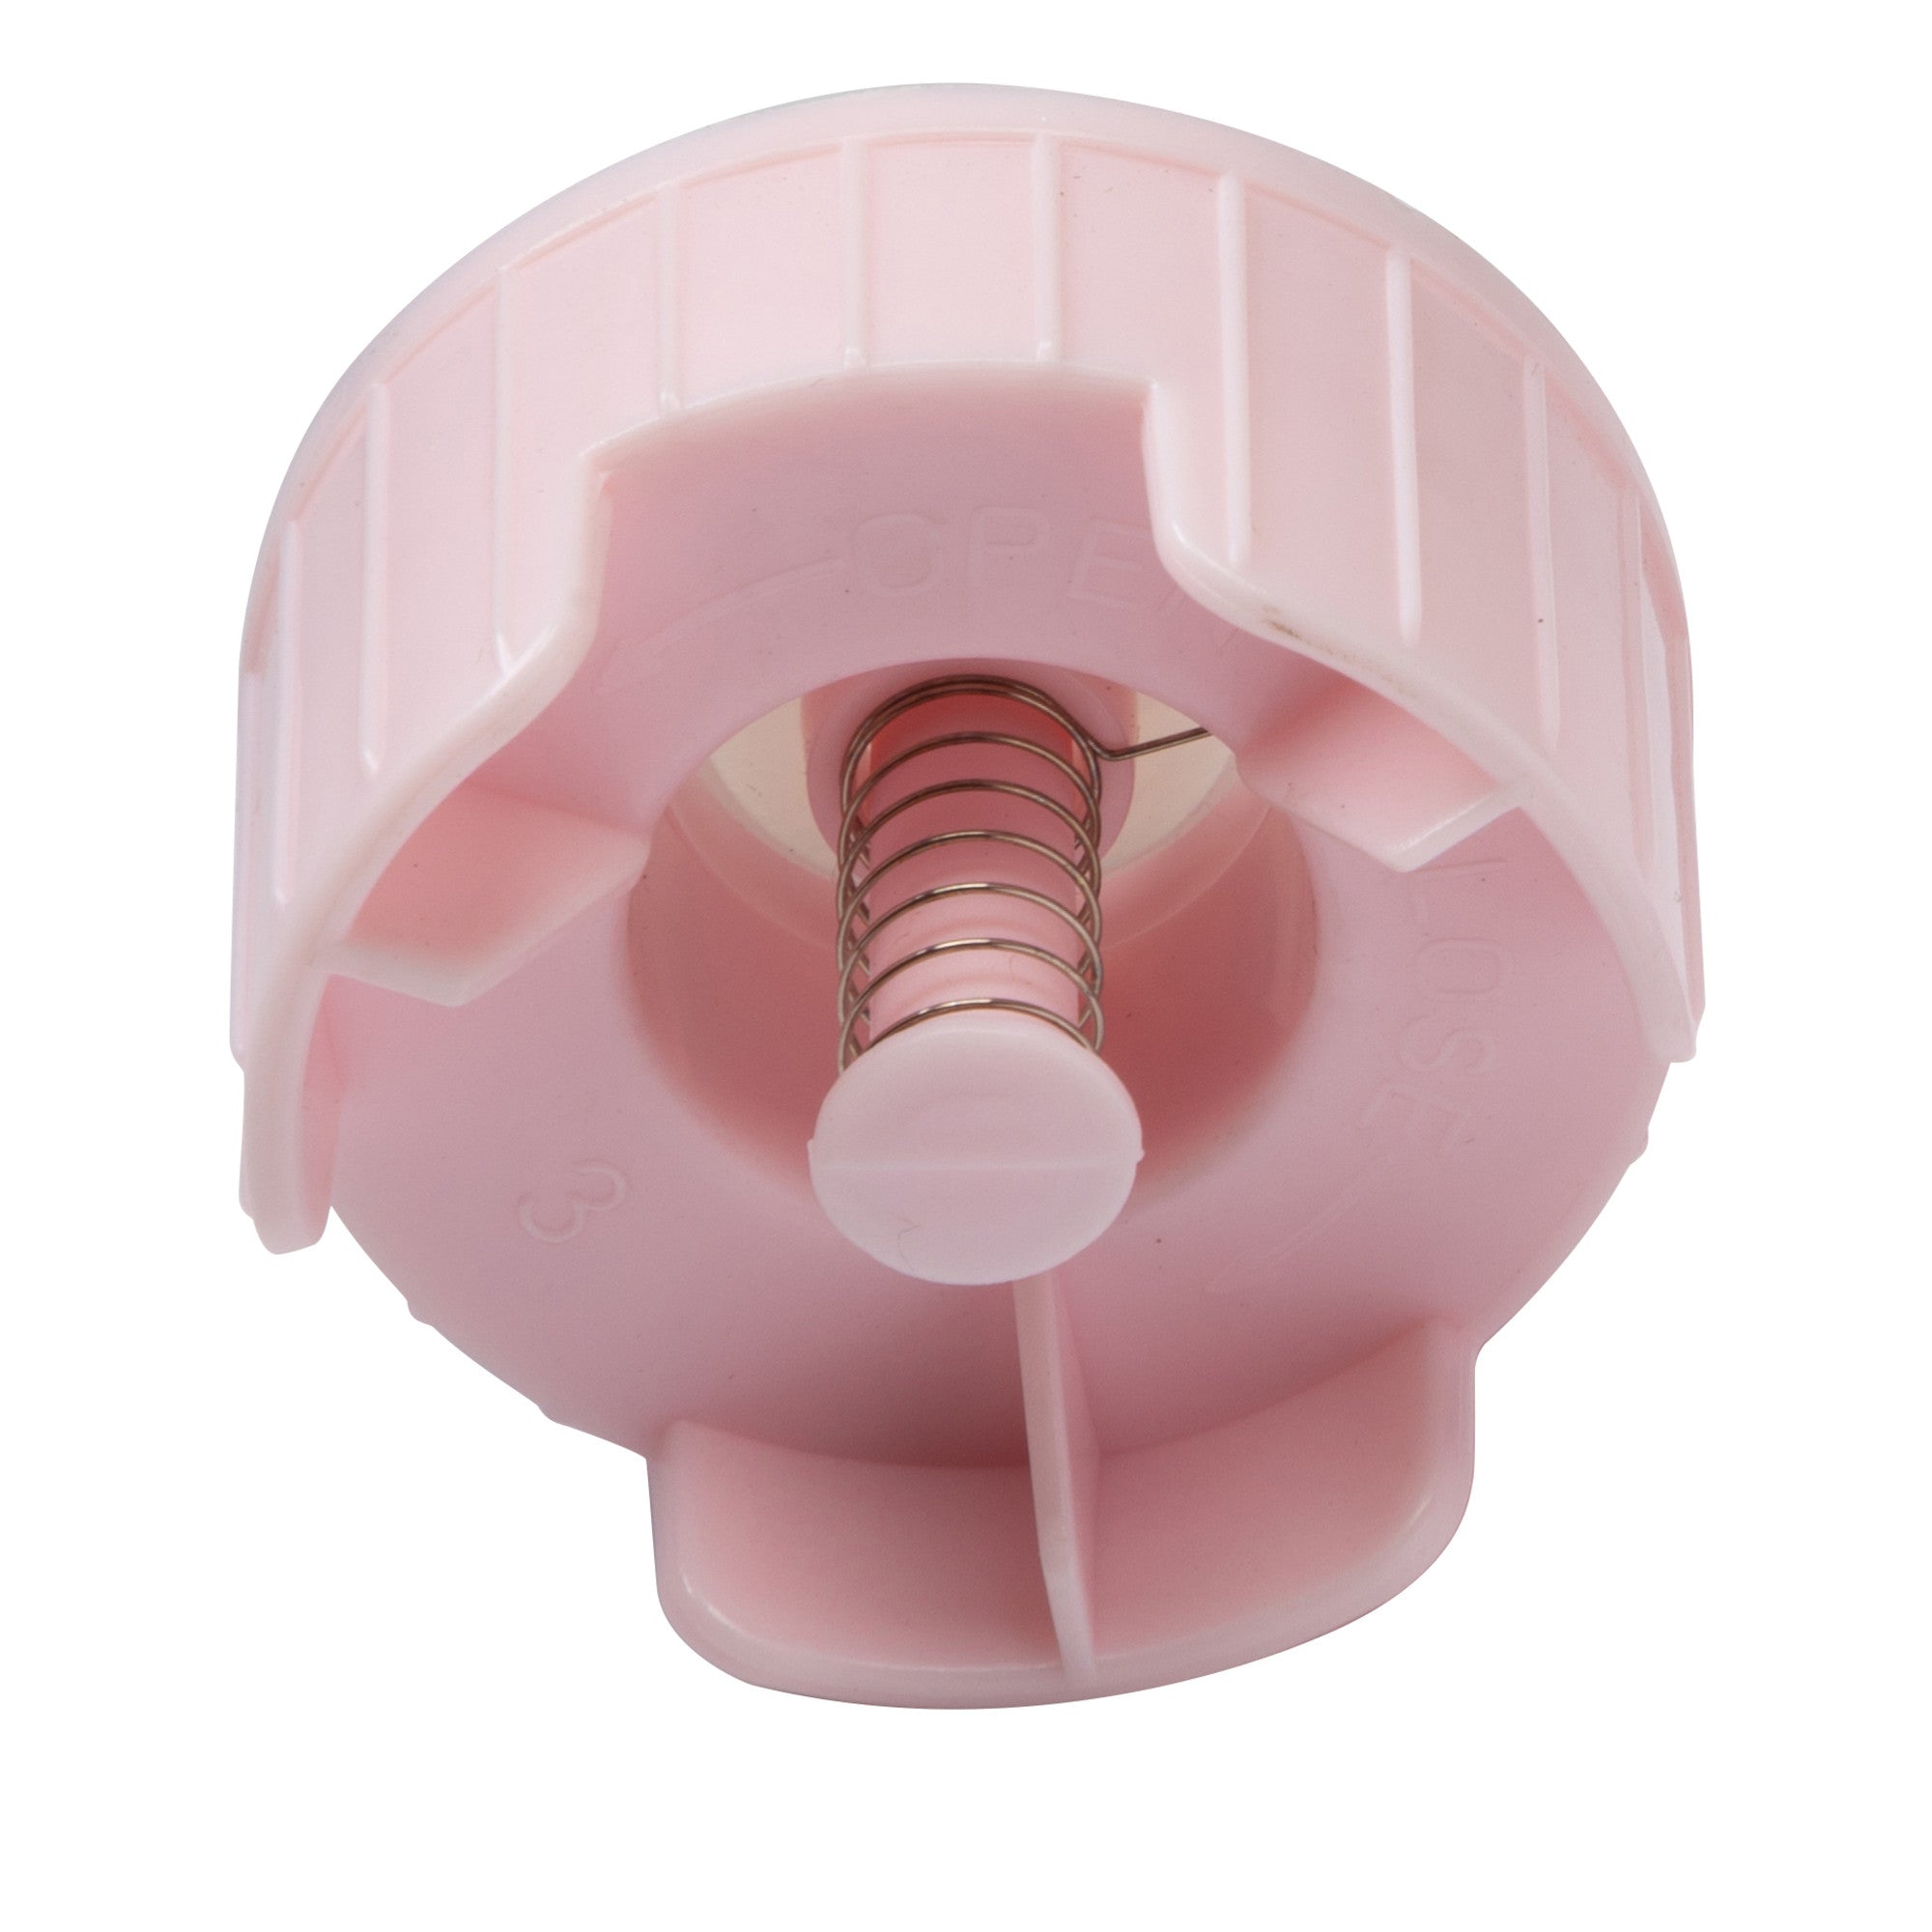 Filter Free Cool Mist Humidifier Replacement Tank Cap - Pink